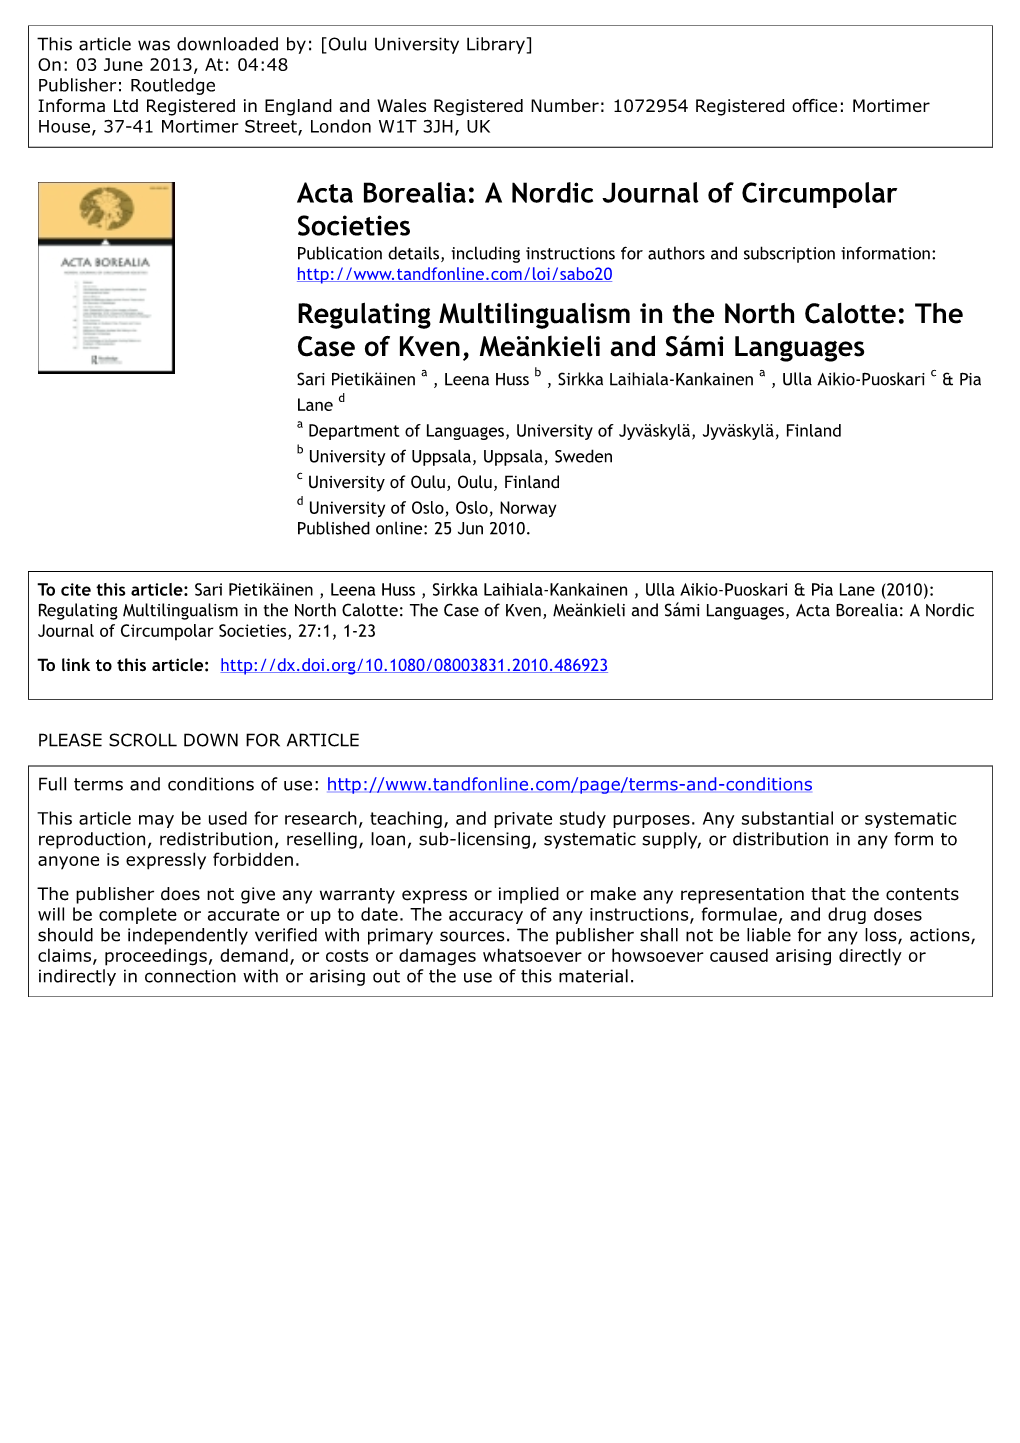 Regulating Multilingualism in the North Calotte: the Case of Kven